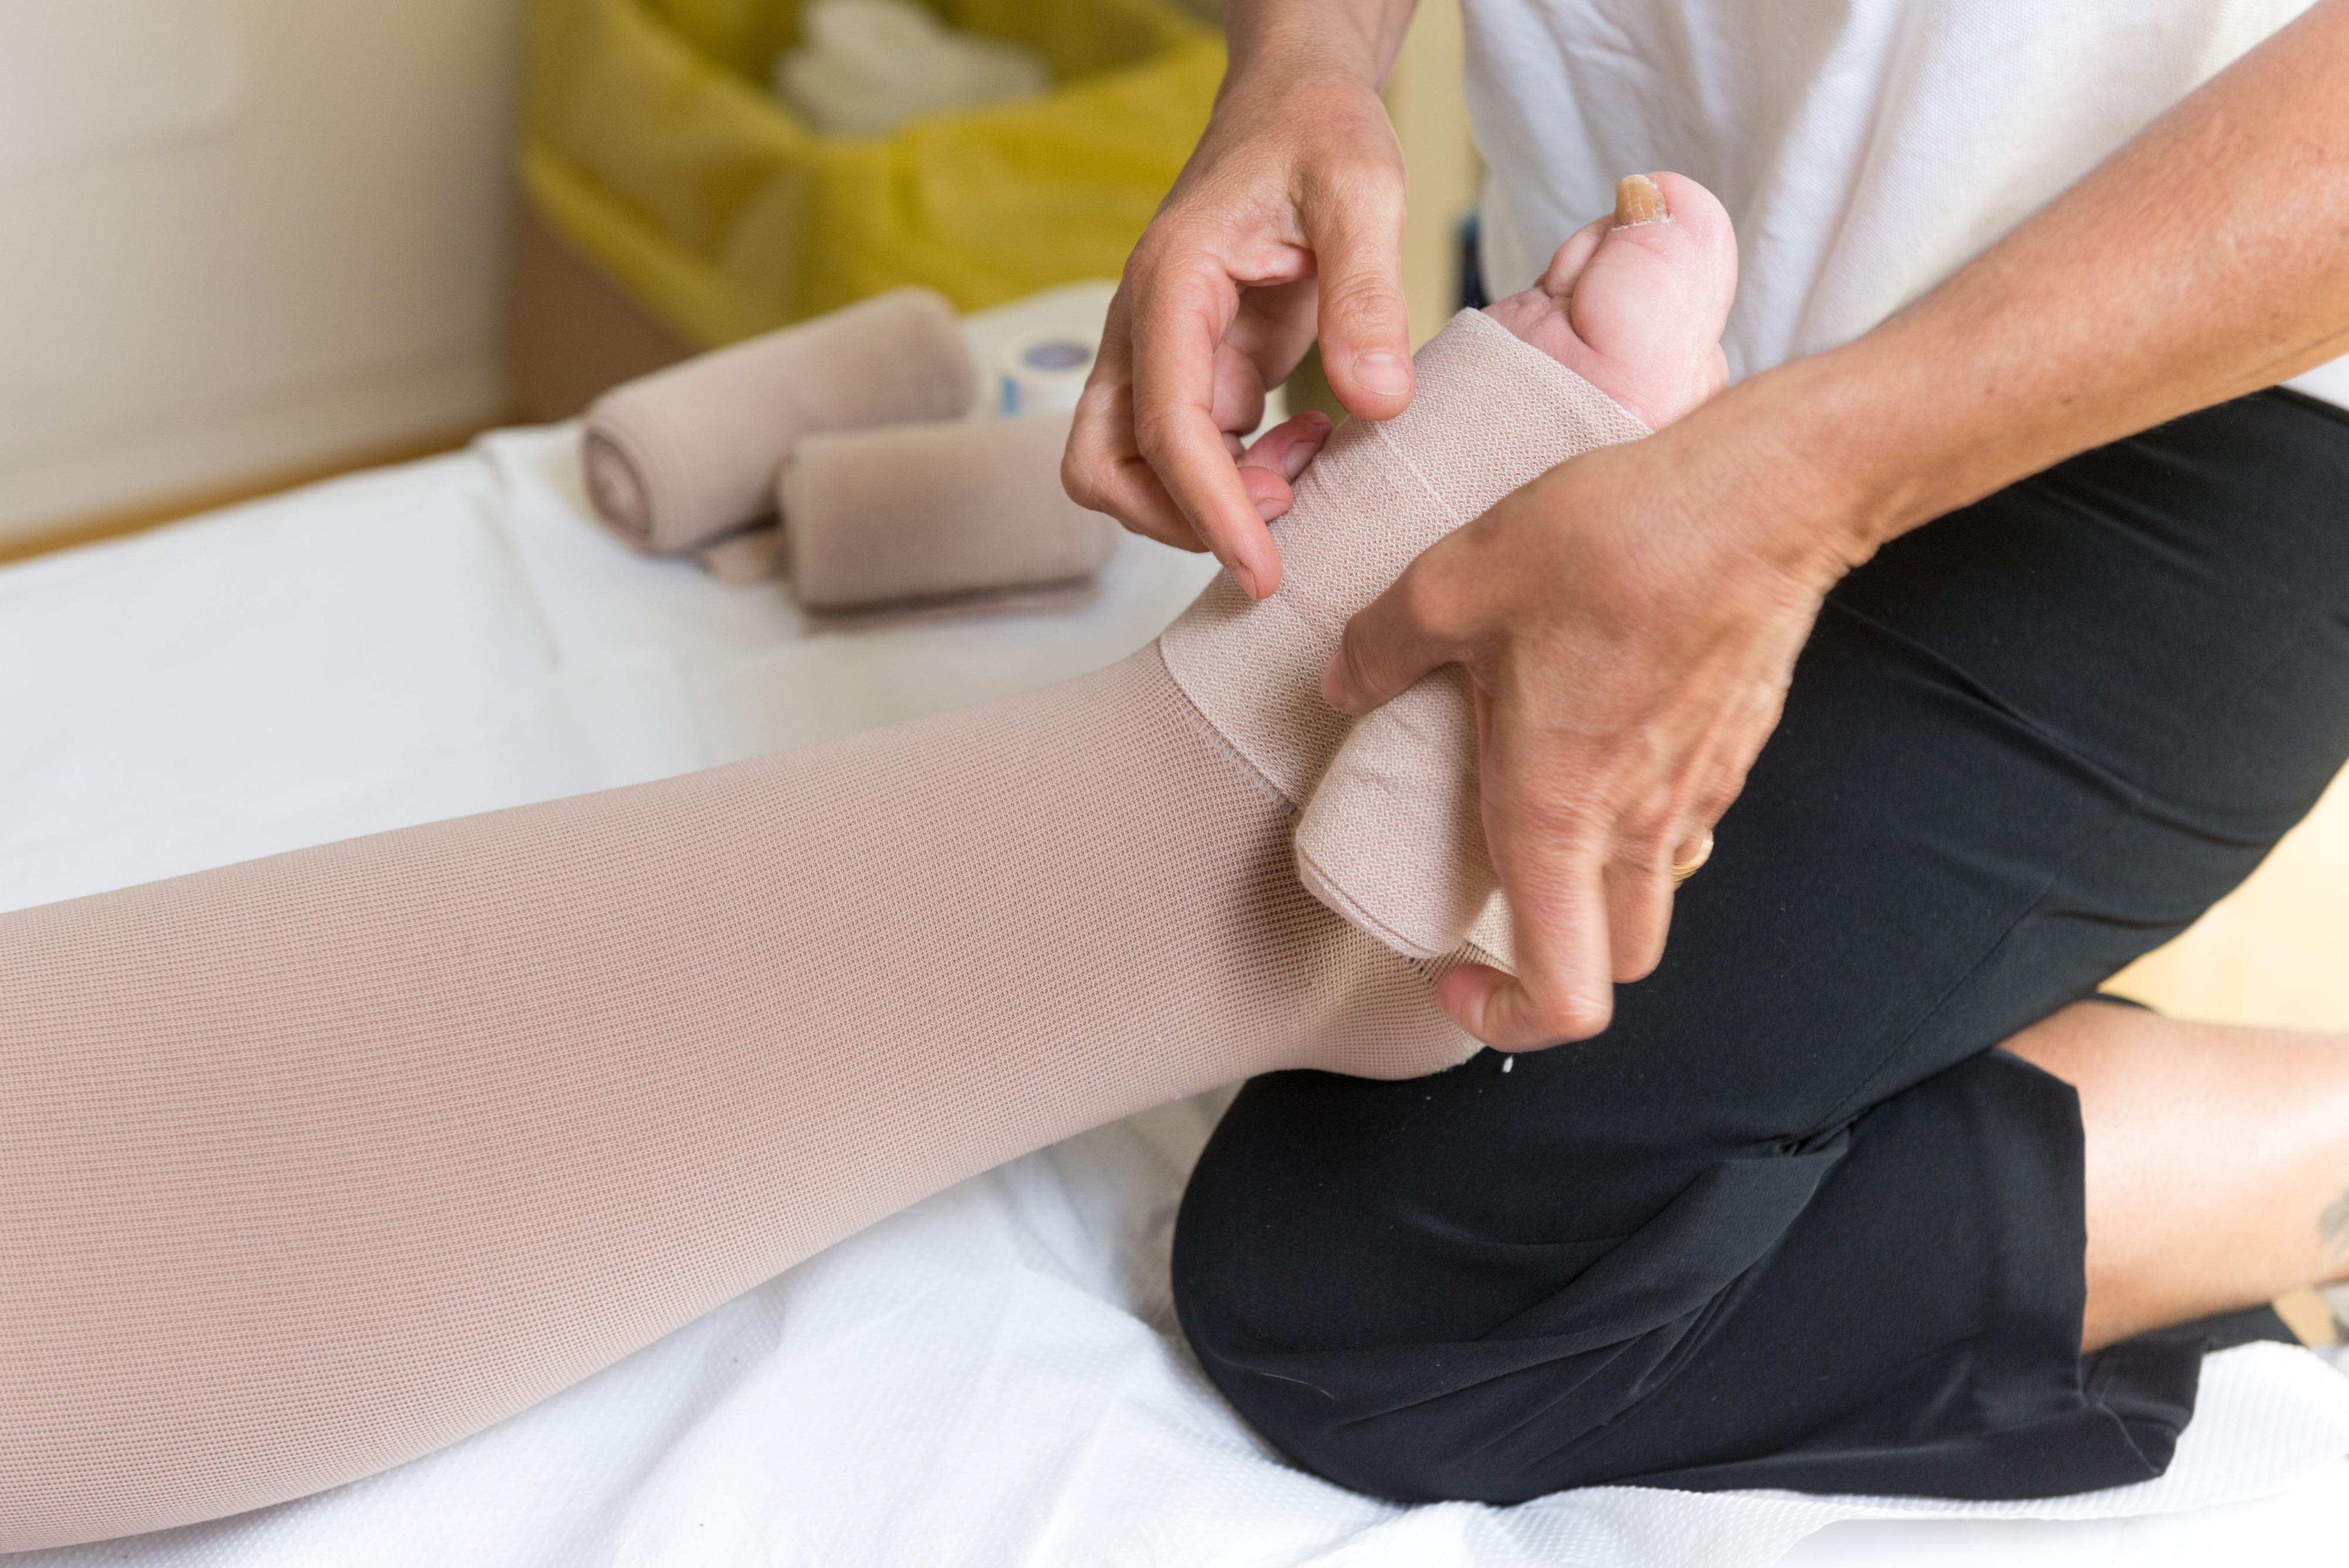 How is Lymphedema Different than Edema?